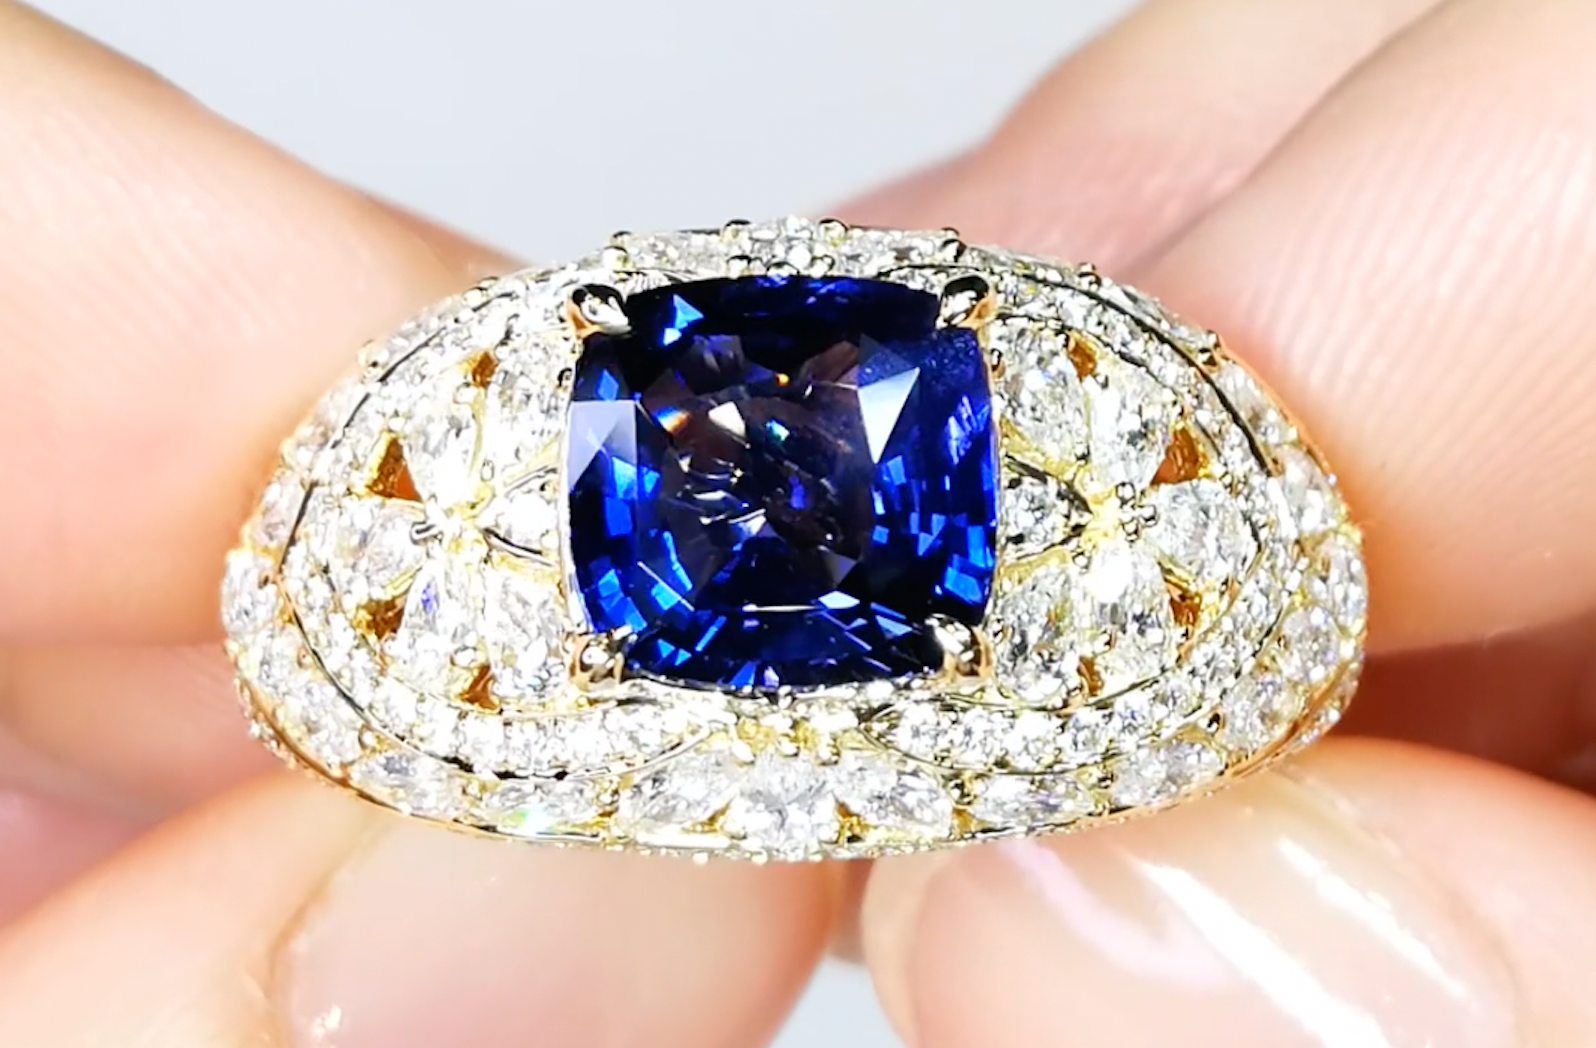 3.05ct Unheated Ceylon Royal Blue Sapphire Ring with D Flawless Diamonds set in 18K Yellow Gold